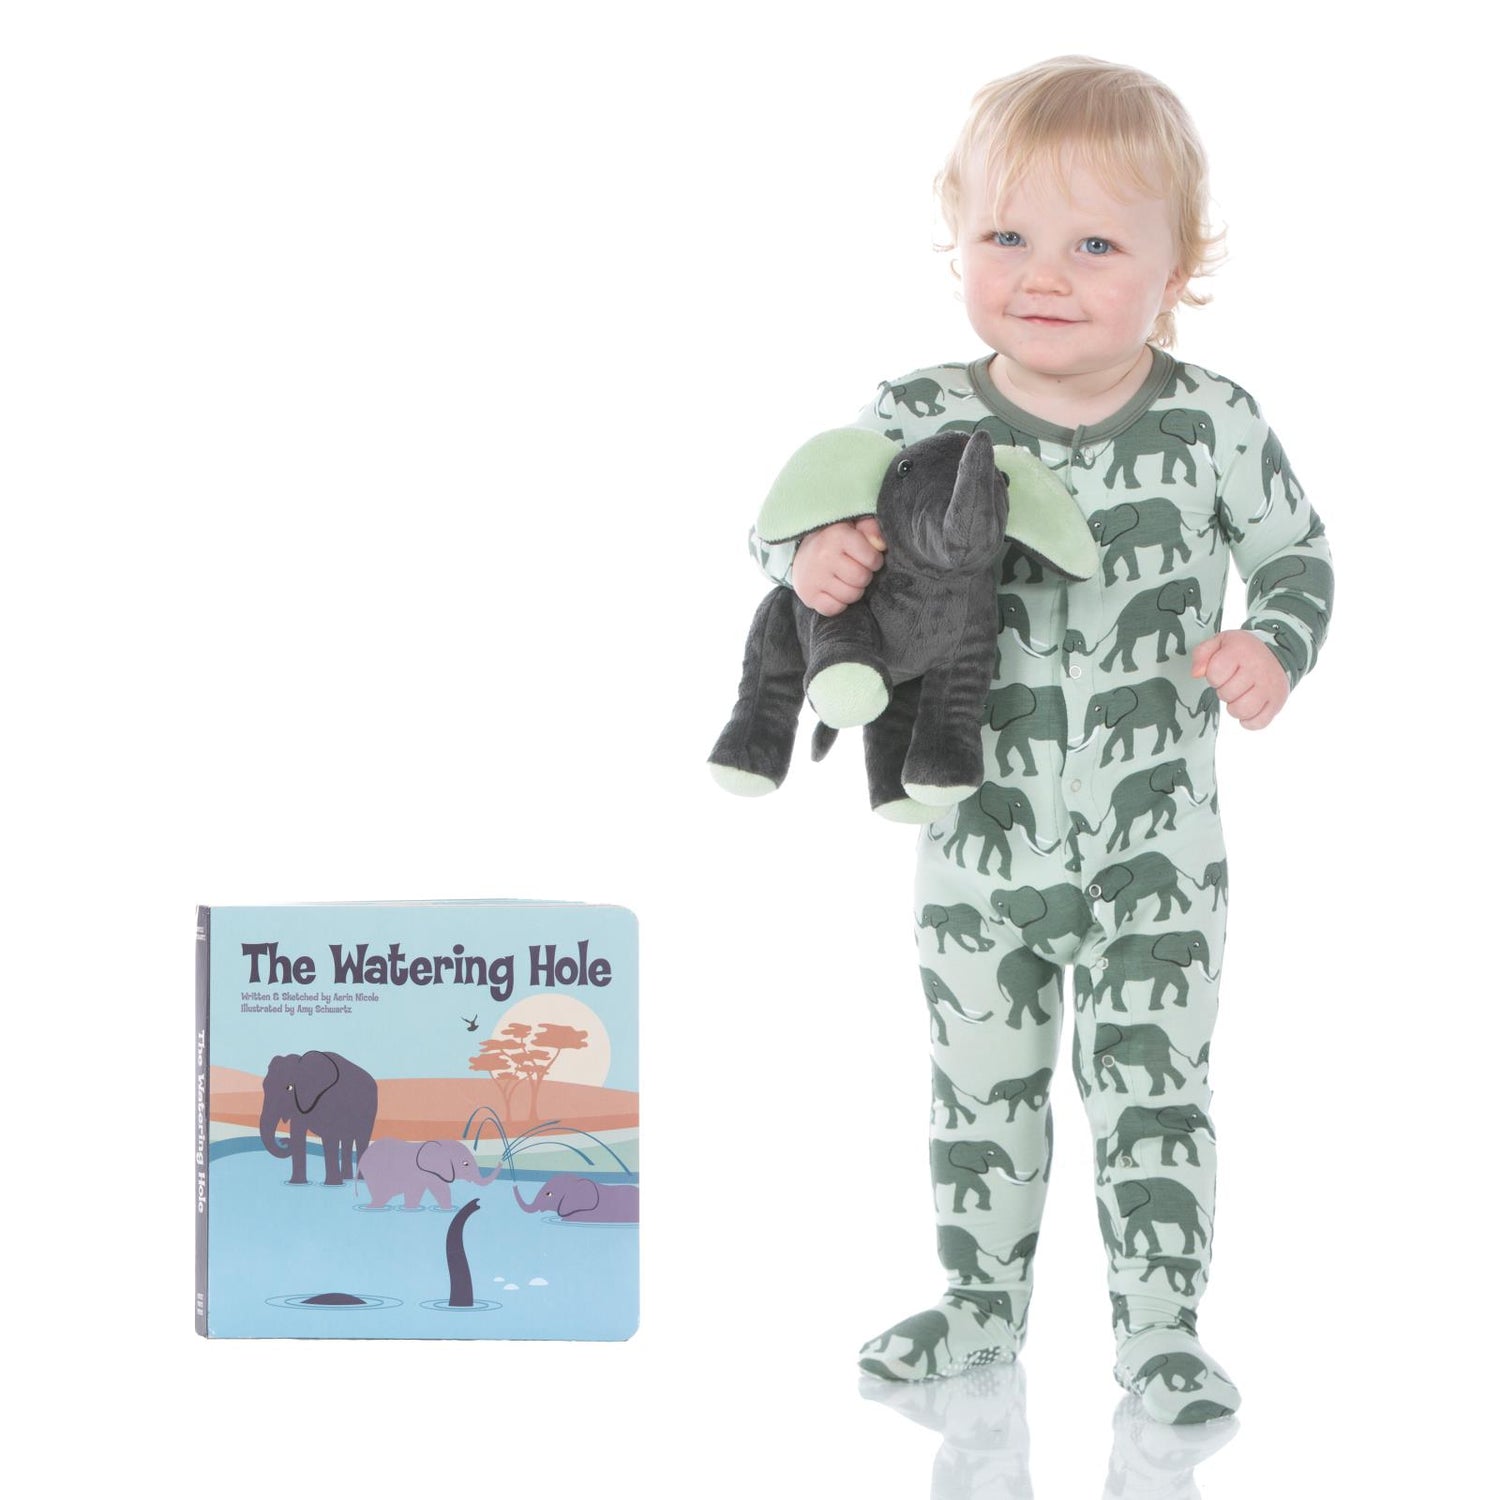 Book & Plush Combo in The Watering Hole with Baby Elephant Plush